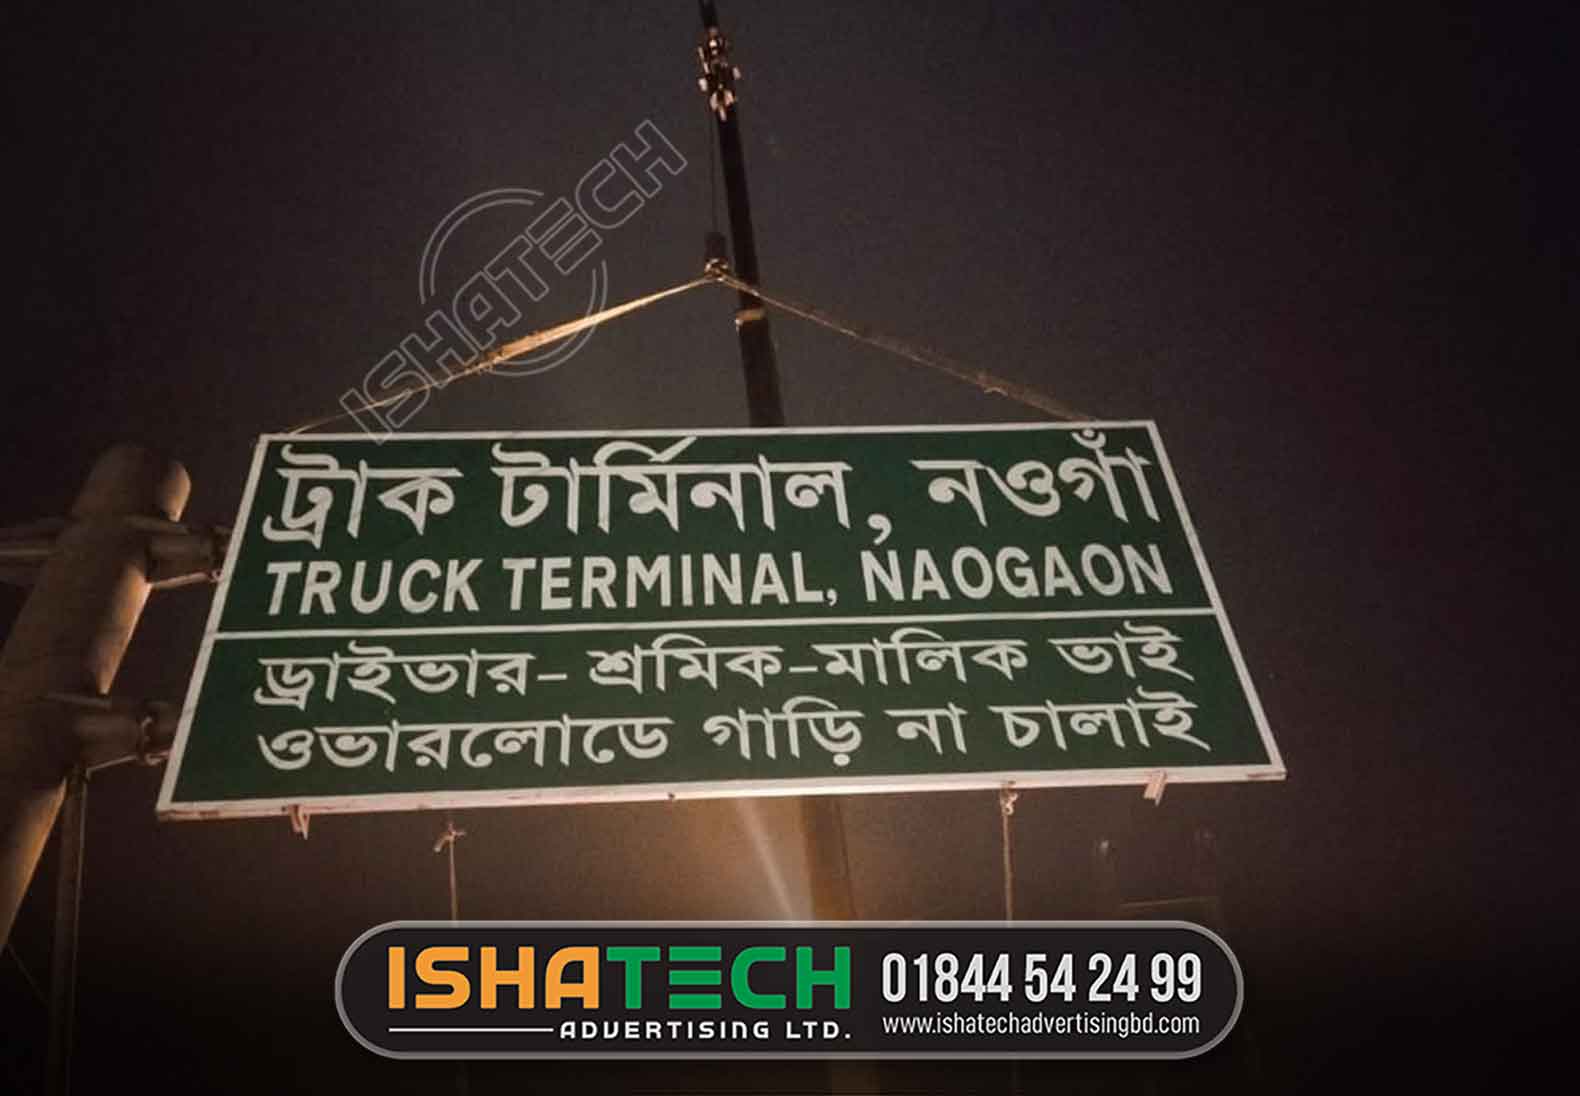 TRUCK TERMINAL NOGA HANGING DIRECTIONAL BILLBOARD OR SIGNBOARD MAKING BY ISHATECH ADVERTISING LTD